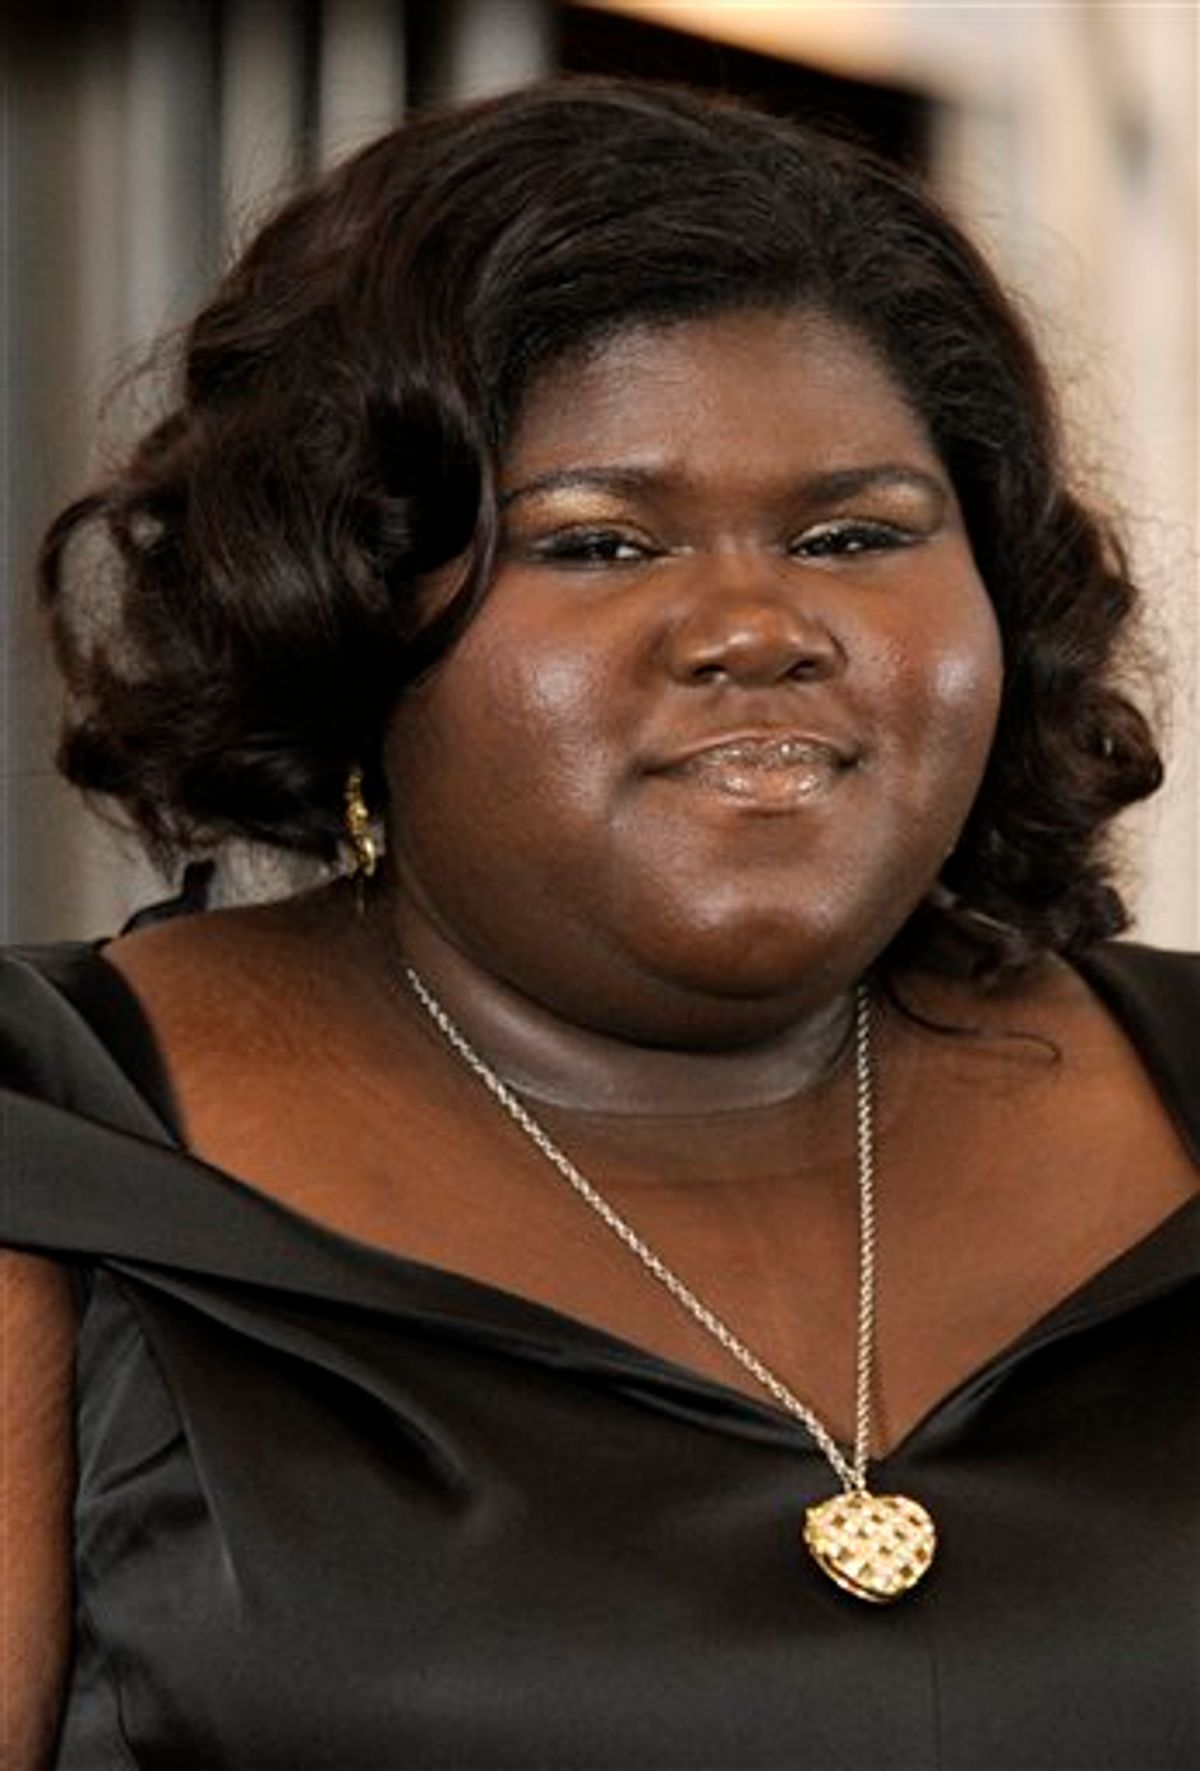 **CORRECTS DATE OF AWARDS ANNOUNCEMENT TO DEC. 15 ** FILE - In this Nov. 14, 2009 file photo, Gabourey Sidibe arrives at The Academy of Motion Picture Arts and Sciences 2009 Governors Awards in Los Angeles. Sidbe was nominated for a Golden Globe award for best actress in a motion picture drama for her role in the film, "Precious," Tuesday, Dec. 15, 2009.  The Golden Globe awards will be held Jan. 17 in Beverly Hills, Calif. (AP Photo/Chris Pizzello, file) (AP)